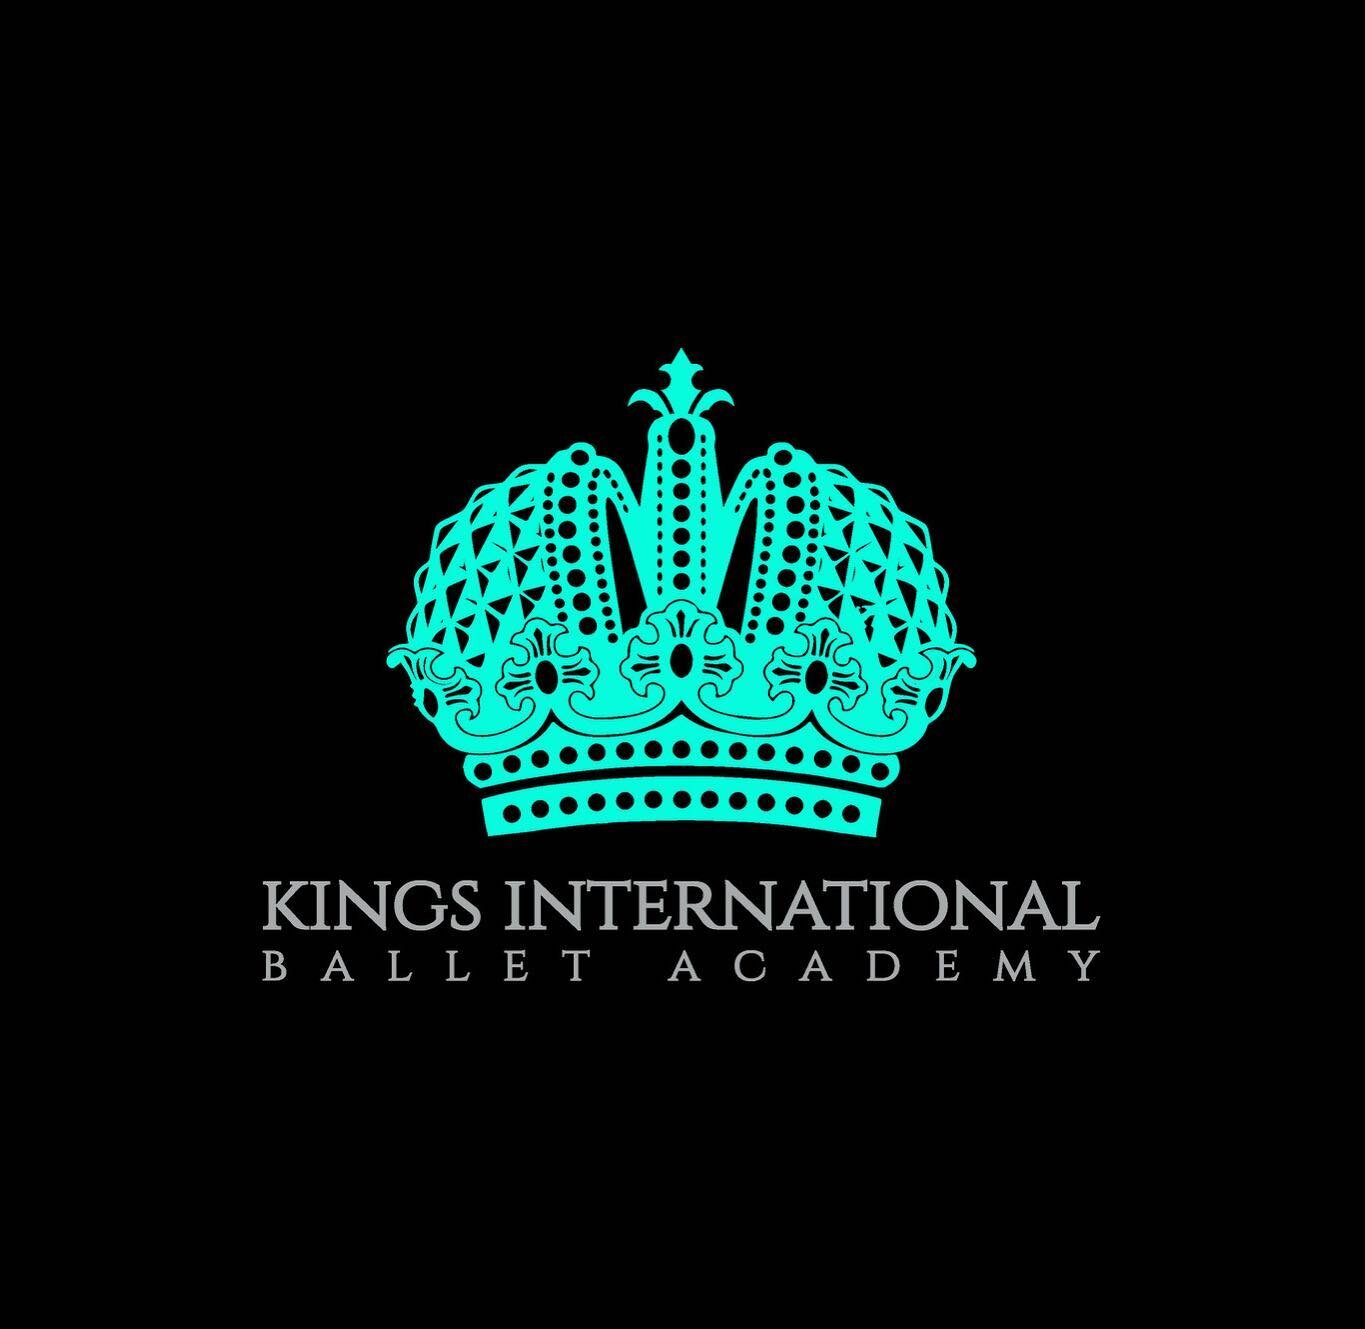 Thrilled to be able to finally share that I will be joining the Artistic Teaching Faculty at the incredible @kingsintballetacademy from September 👑

I really cannot wait 💕